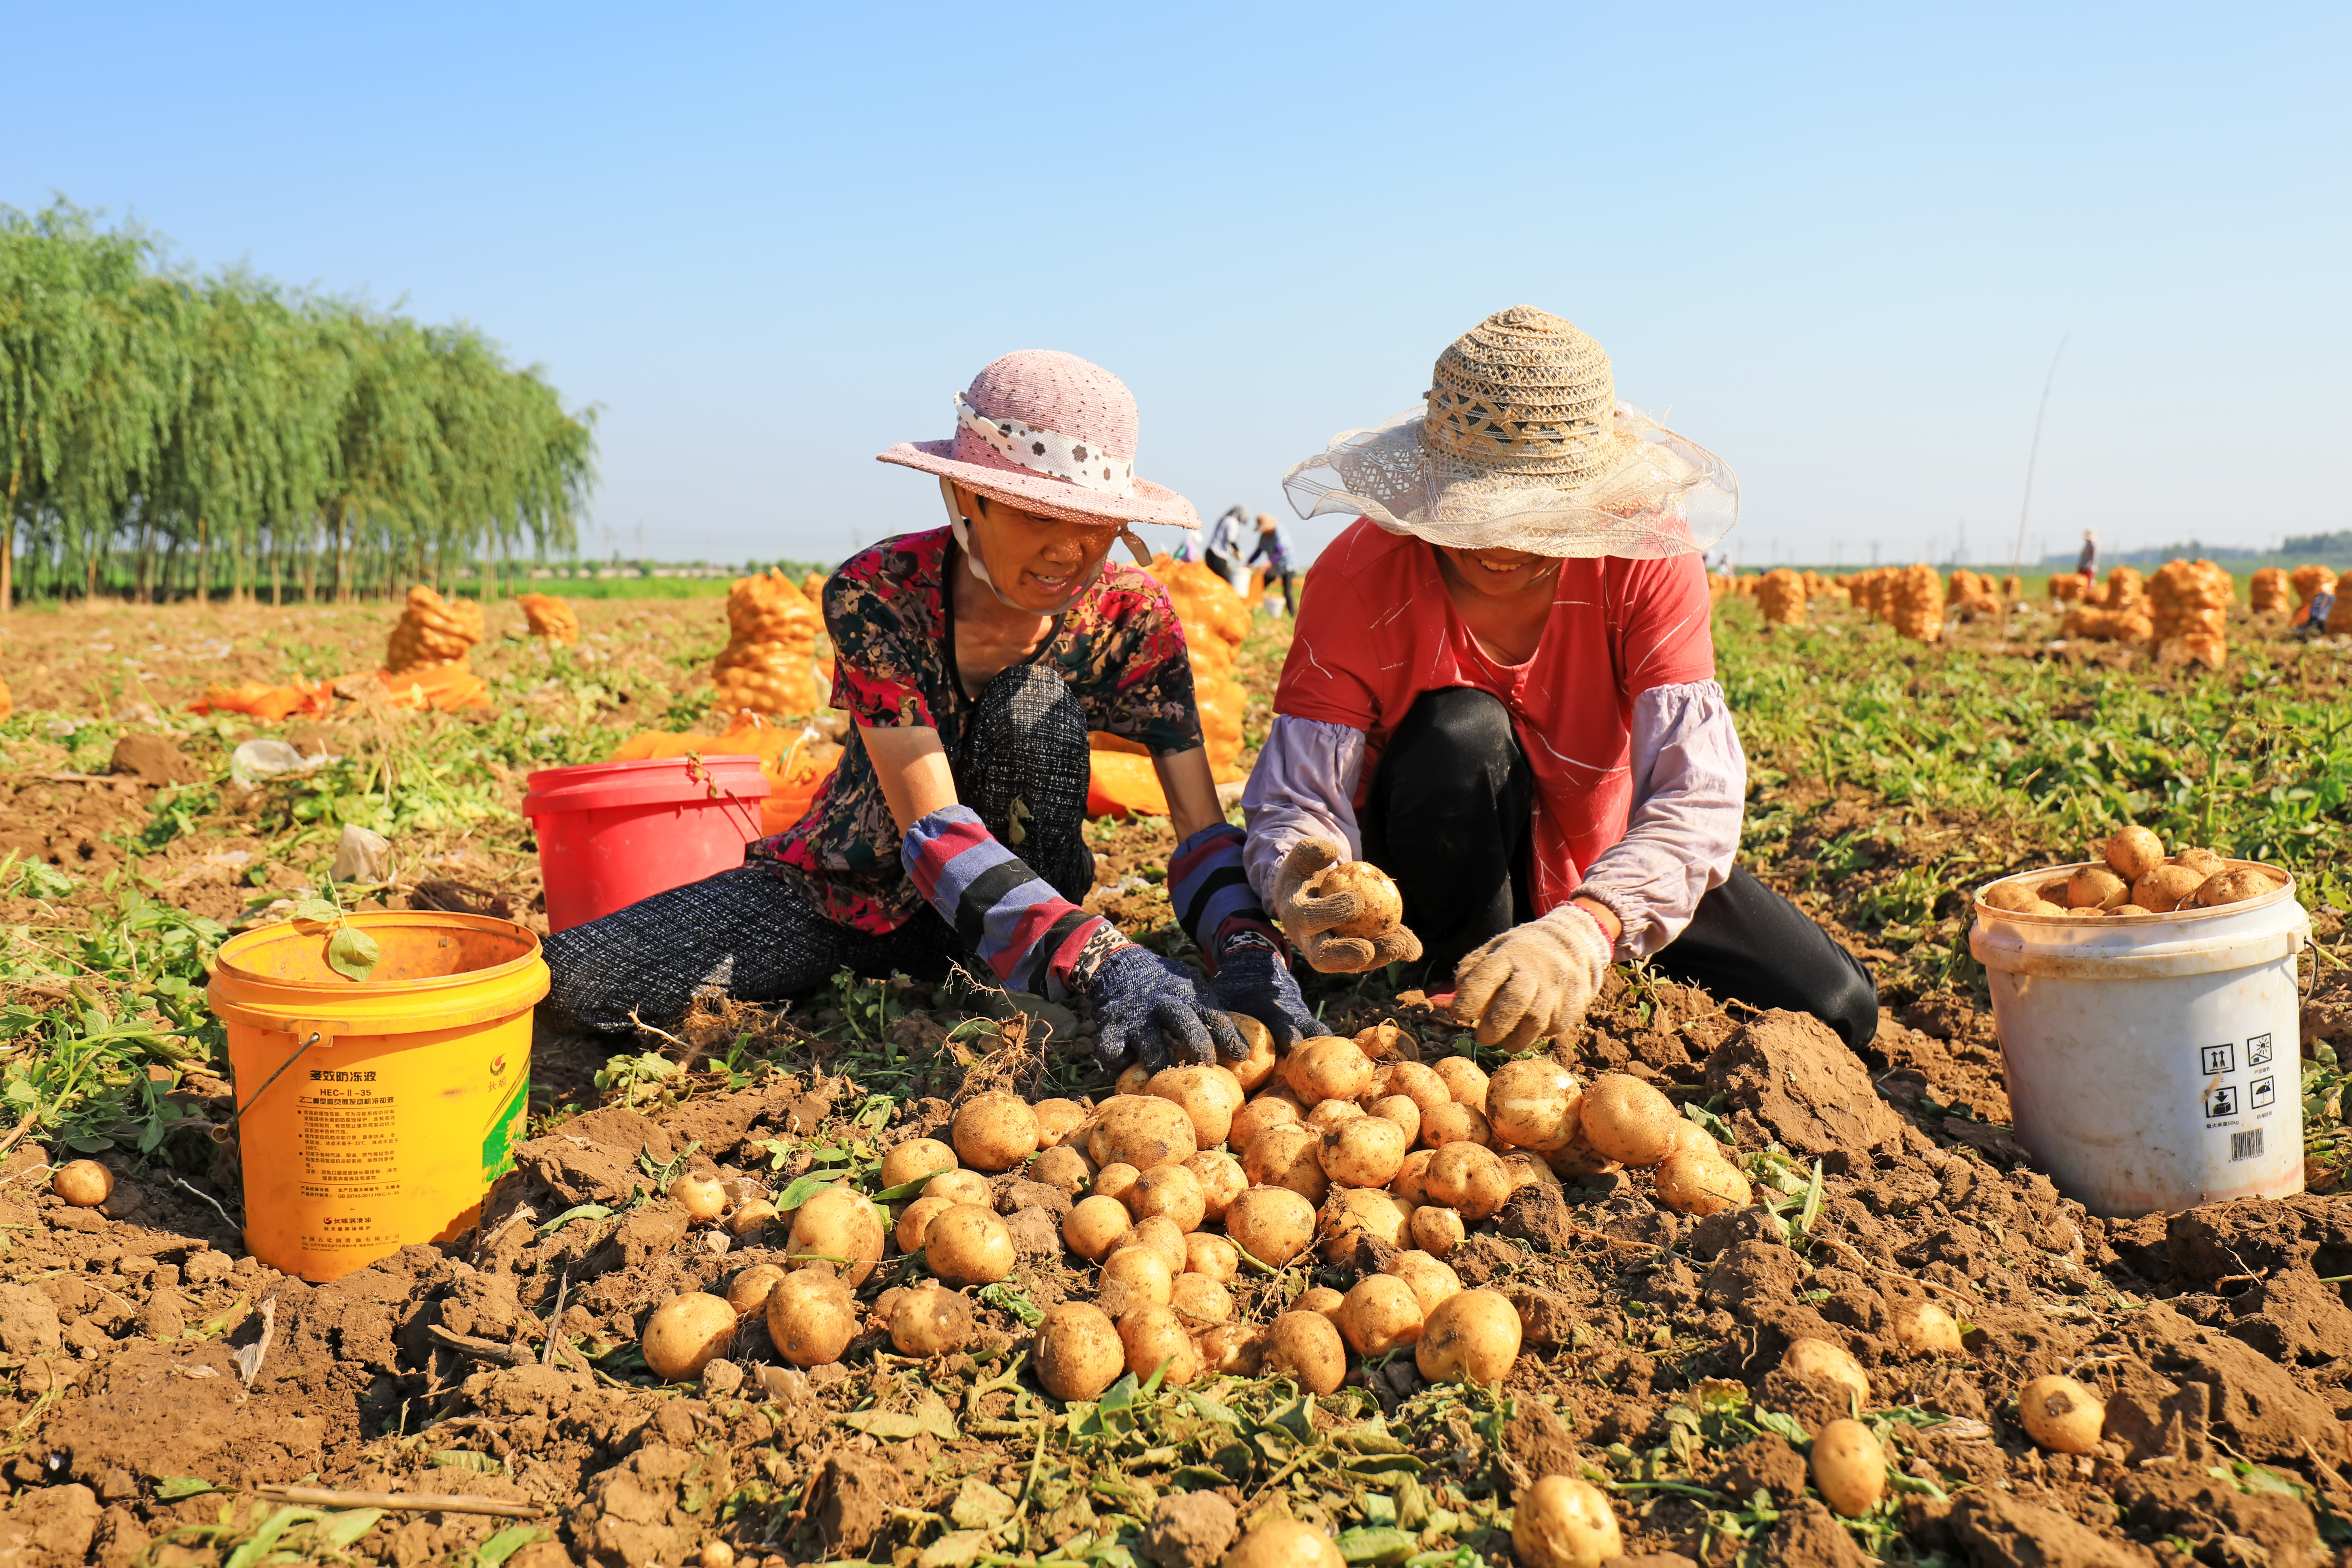 China began promoting potatoes as a staple in 2015 in an effort to combat food insecurity.